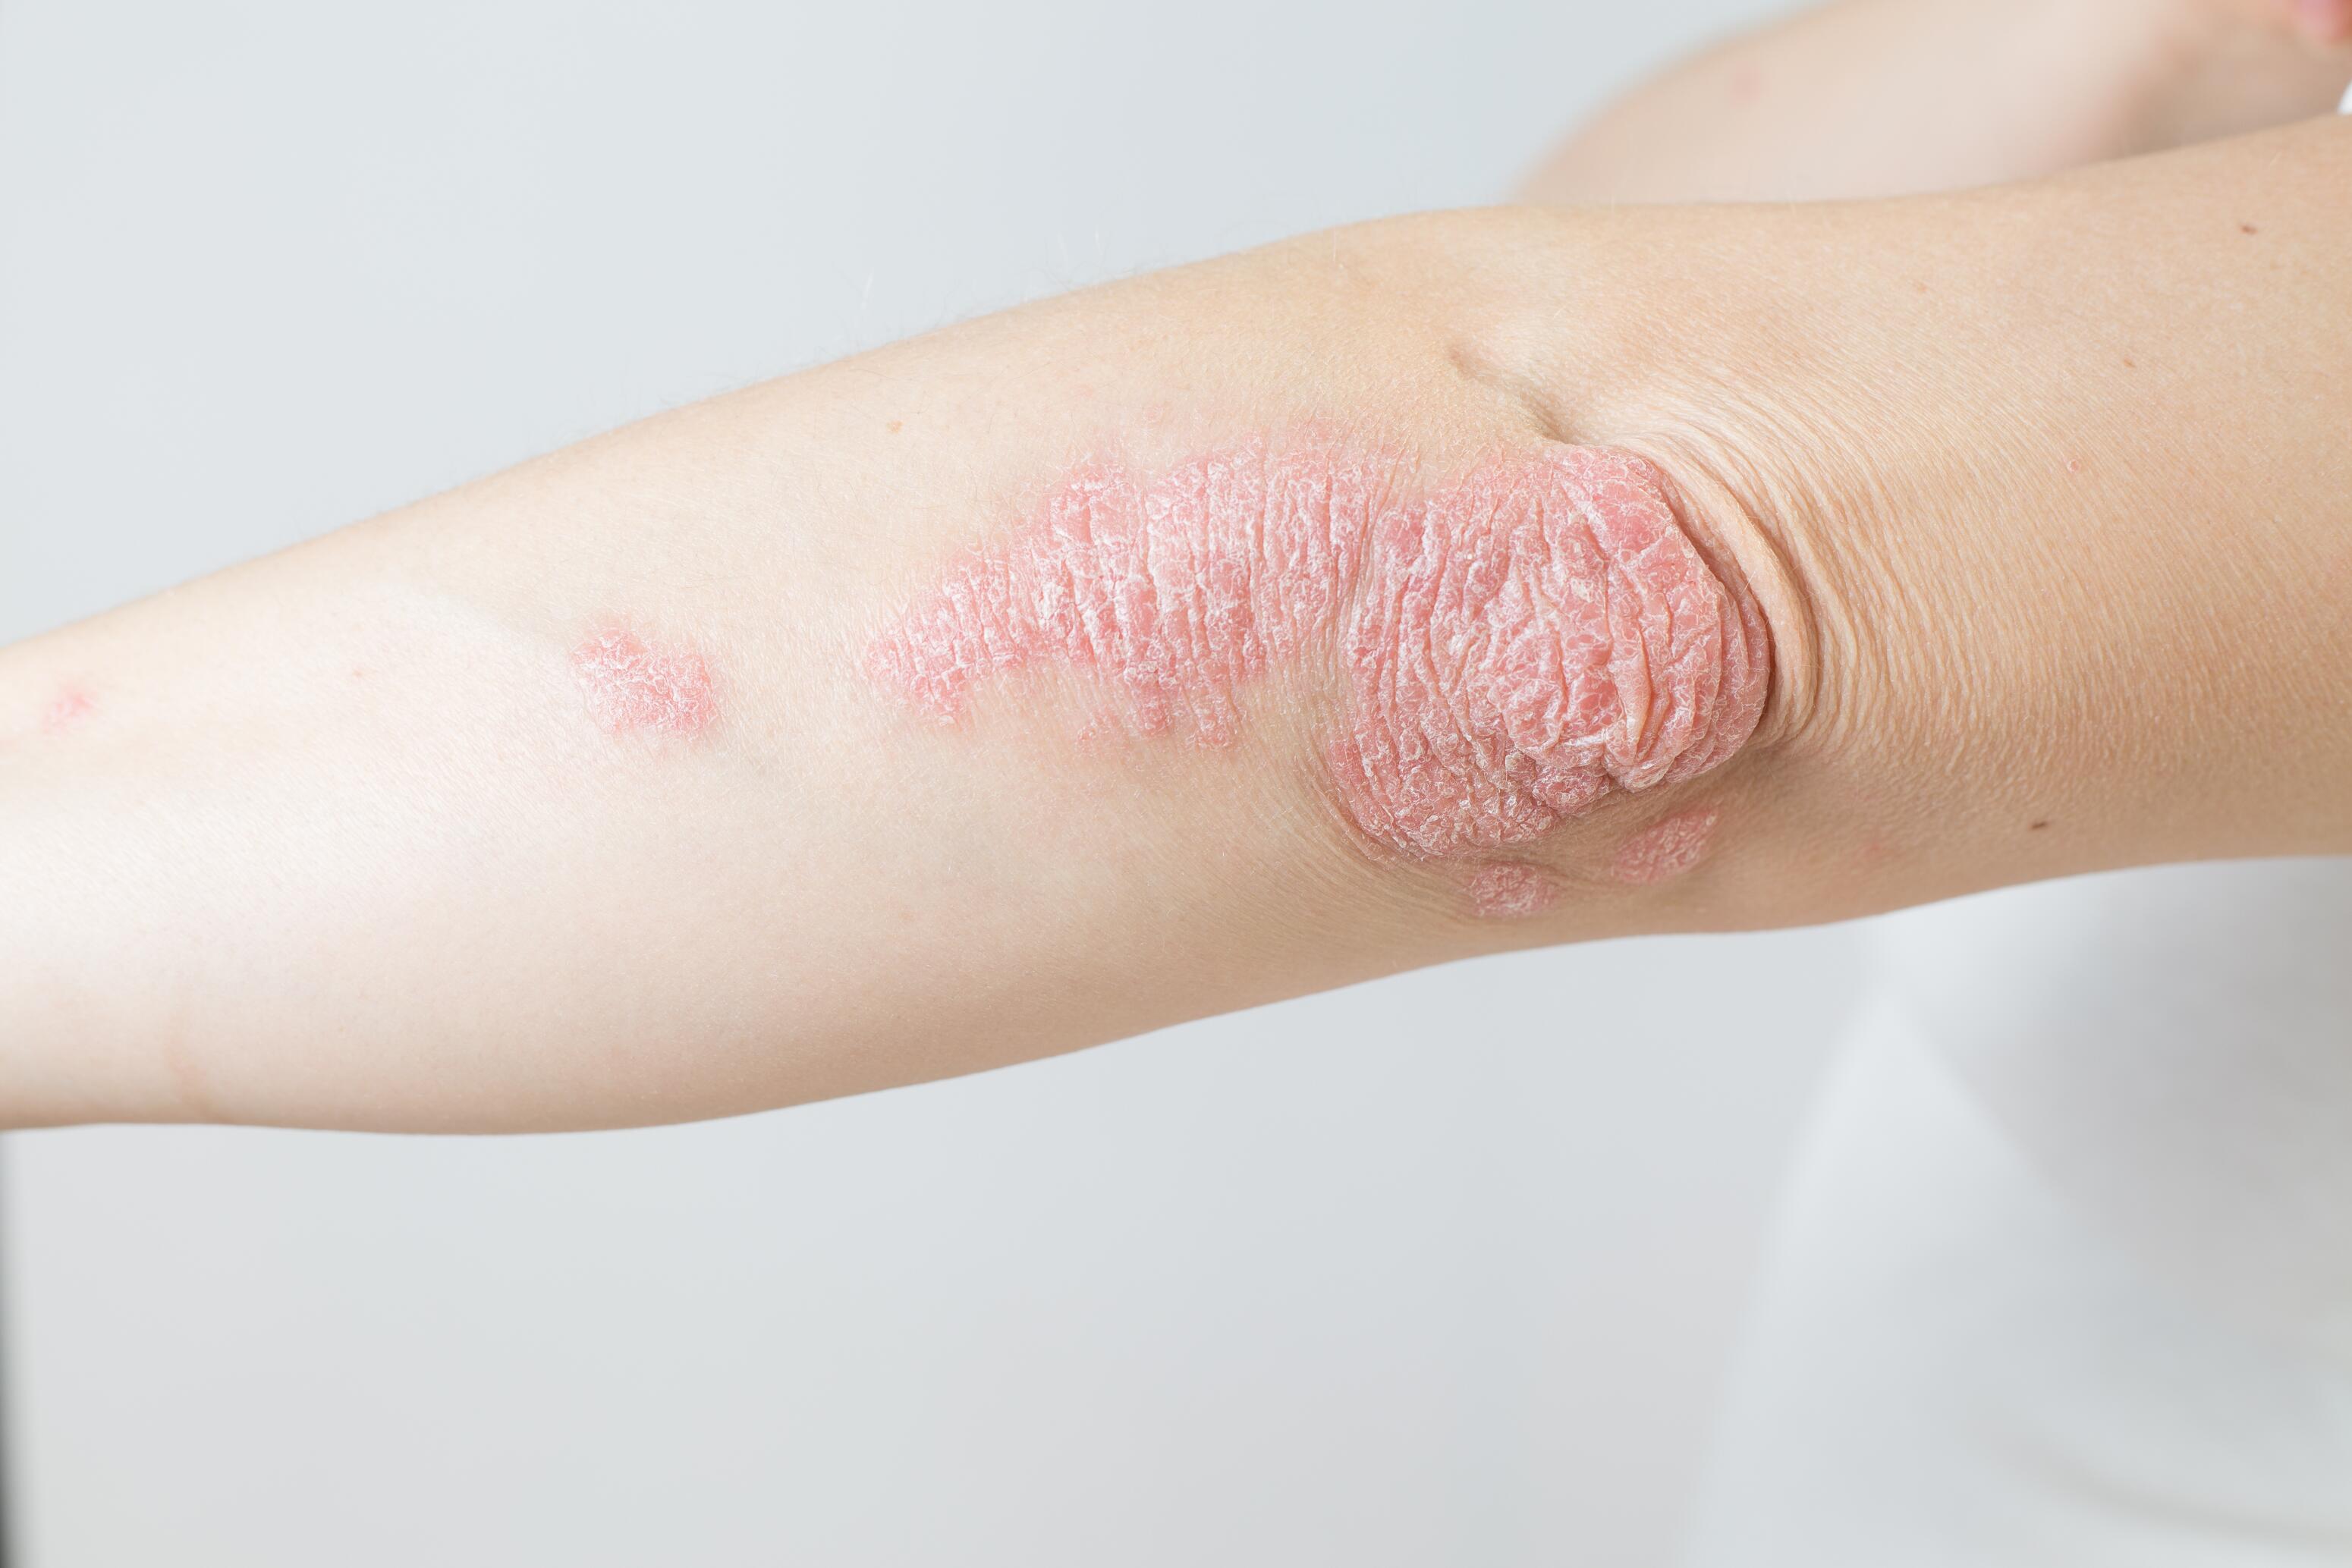 Arm with a psoriasis plaque on the elbow